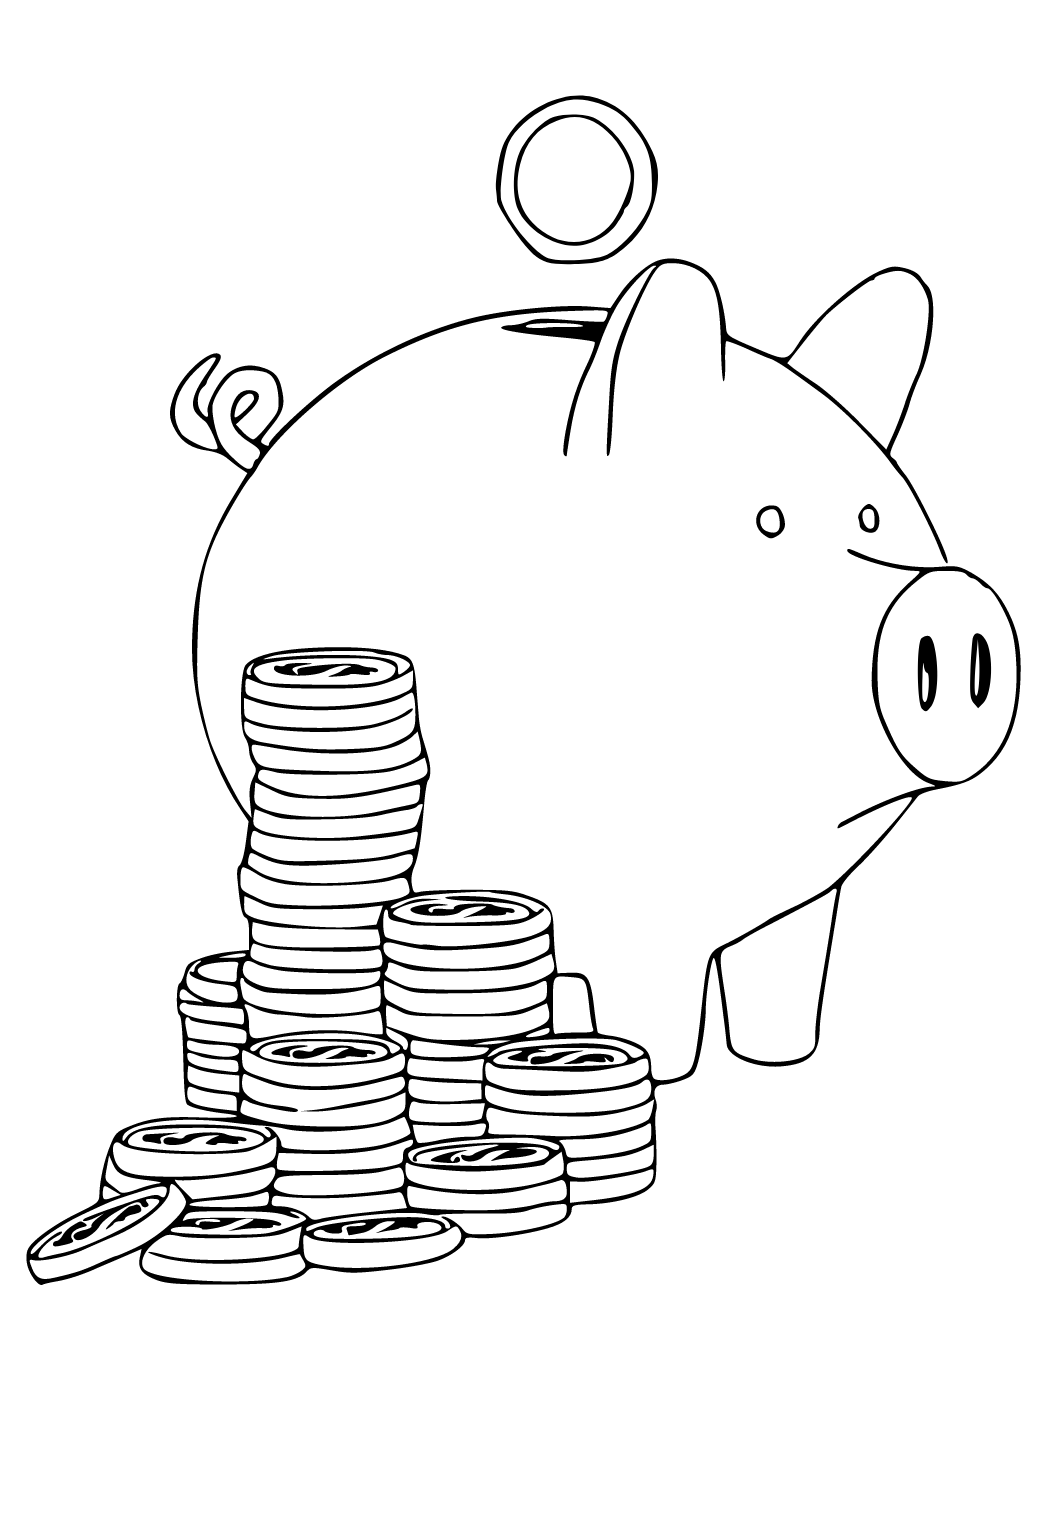 Free printable money pig coloring page for adults and kids